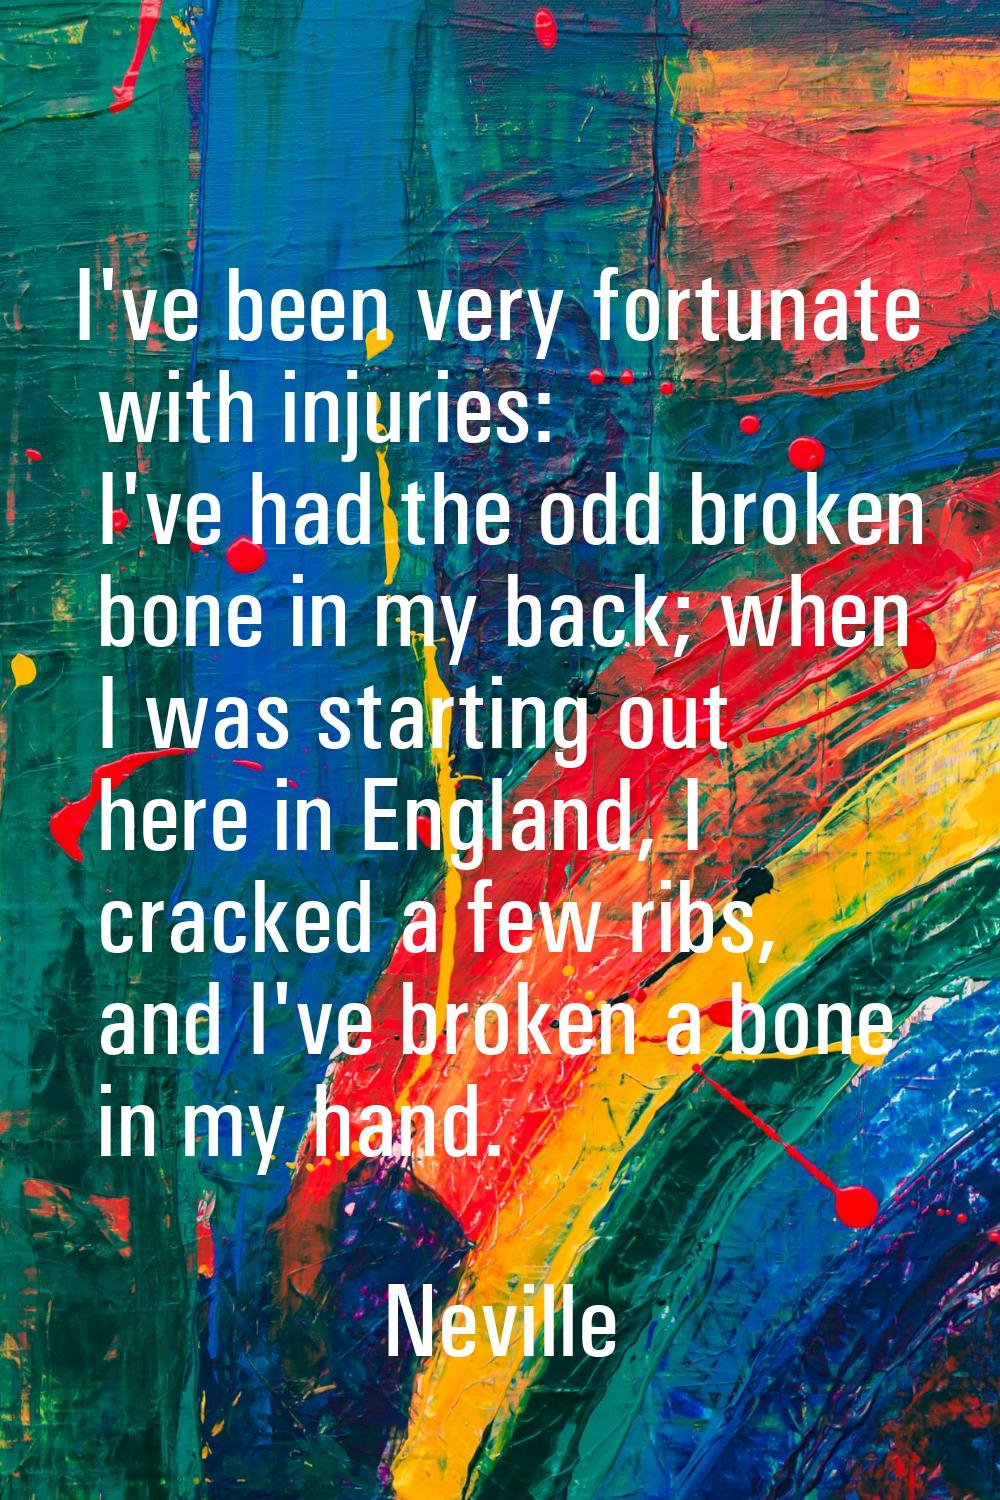 I've been very fortunate with injuries: I've had the odd broken bone in my back; when I was startin